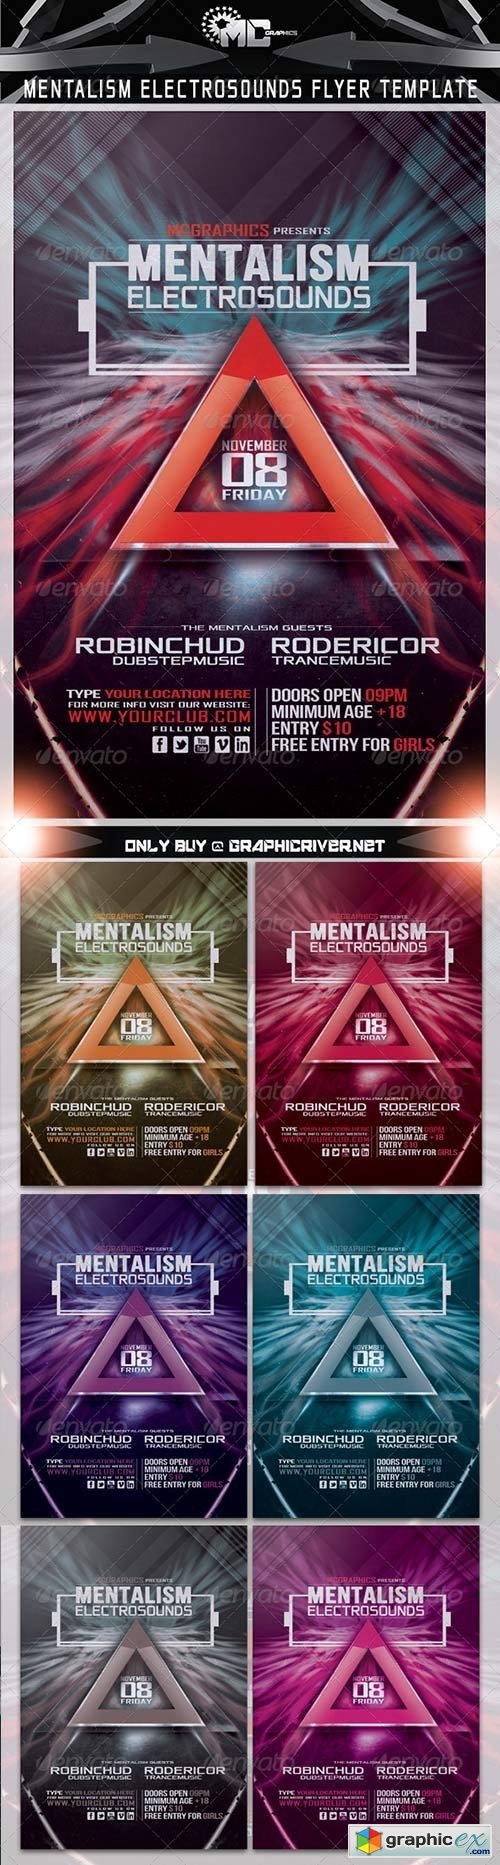 Mentalism Electro Sounds Flyer Template